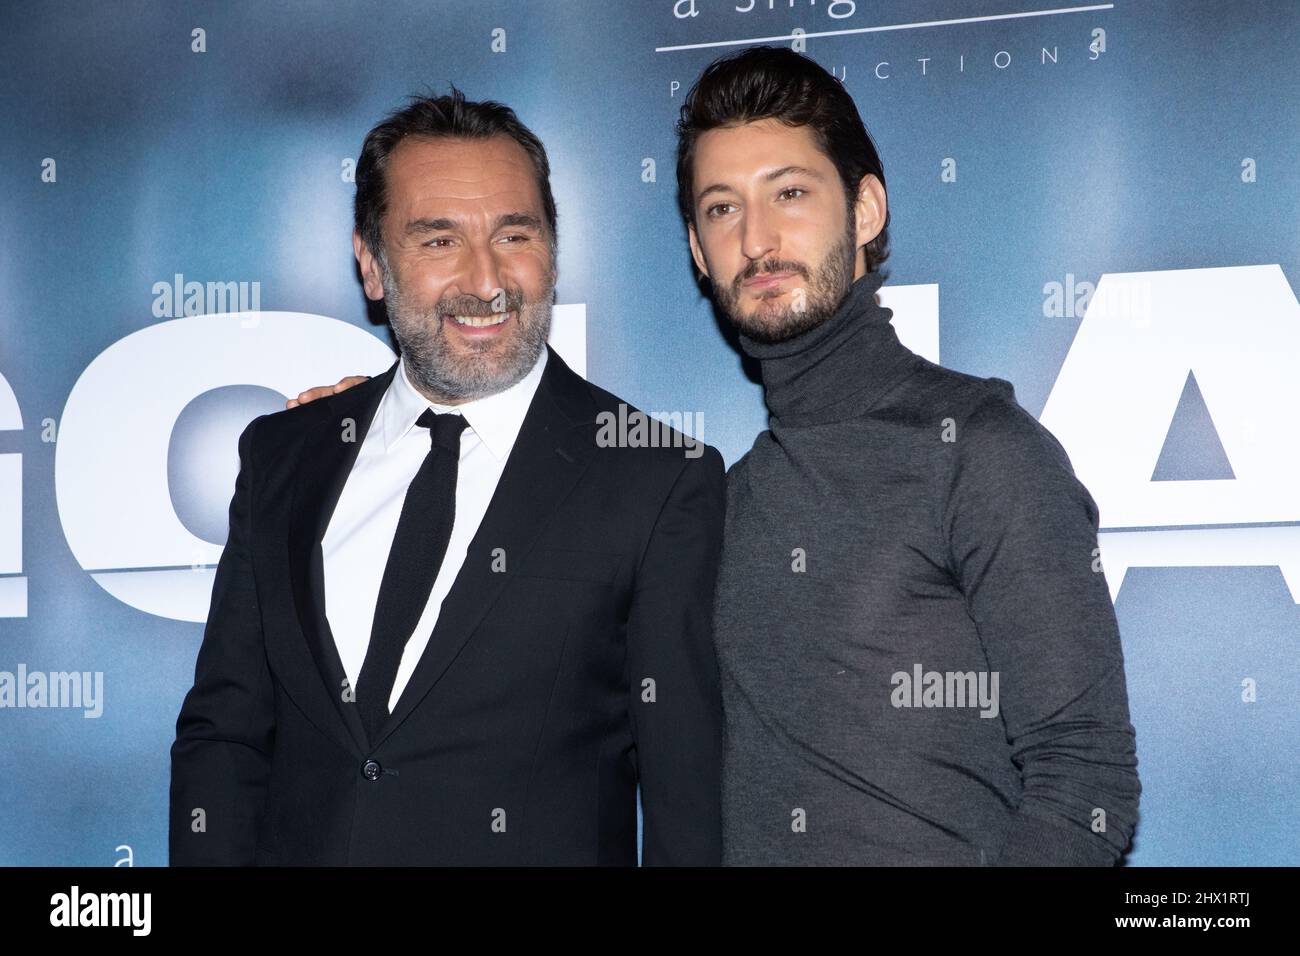 Paris, France, the 8th march 2022, the team of the film Goliath, Pierre Niney and Gilles Lellouche, François Loock/Alamy Stock Photo